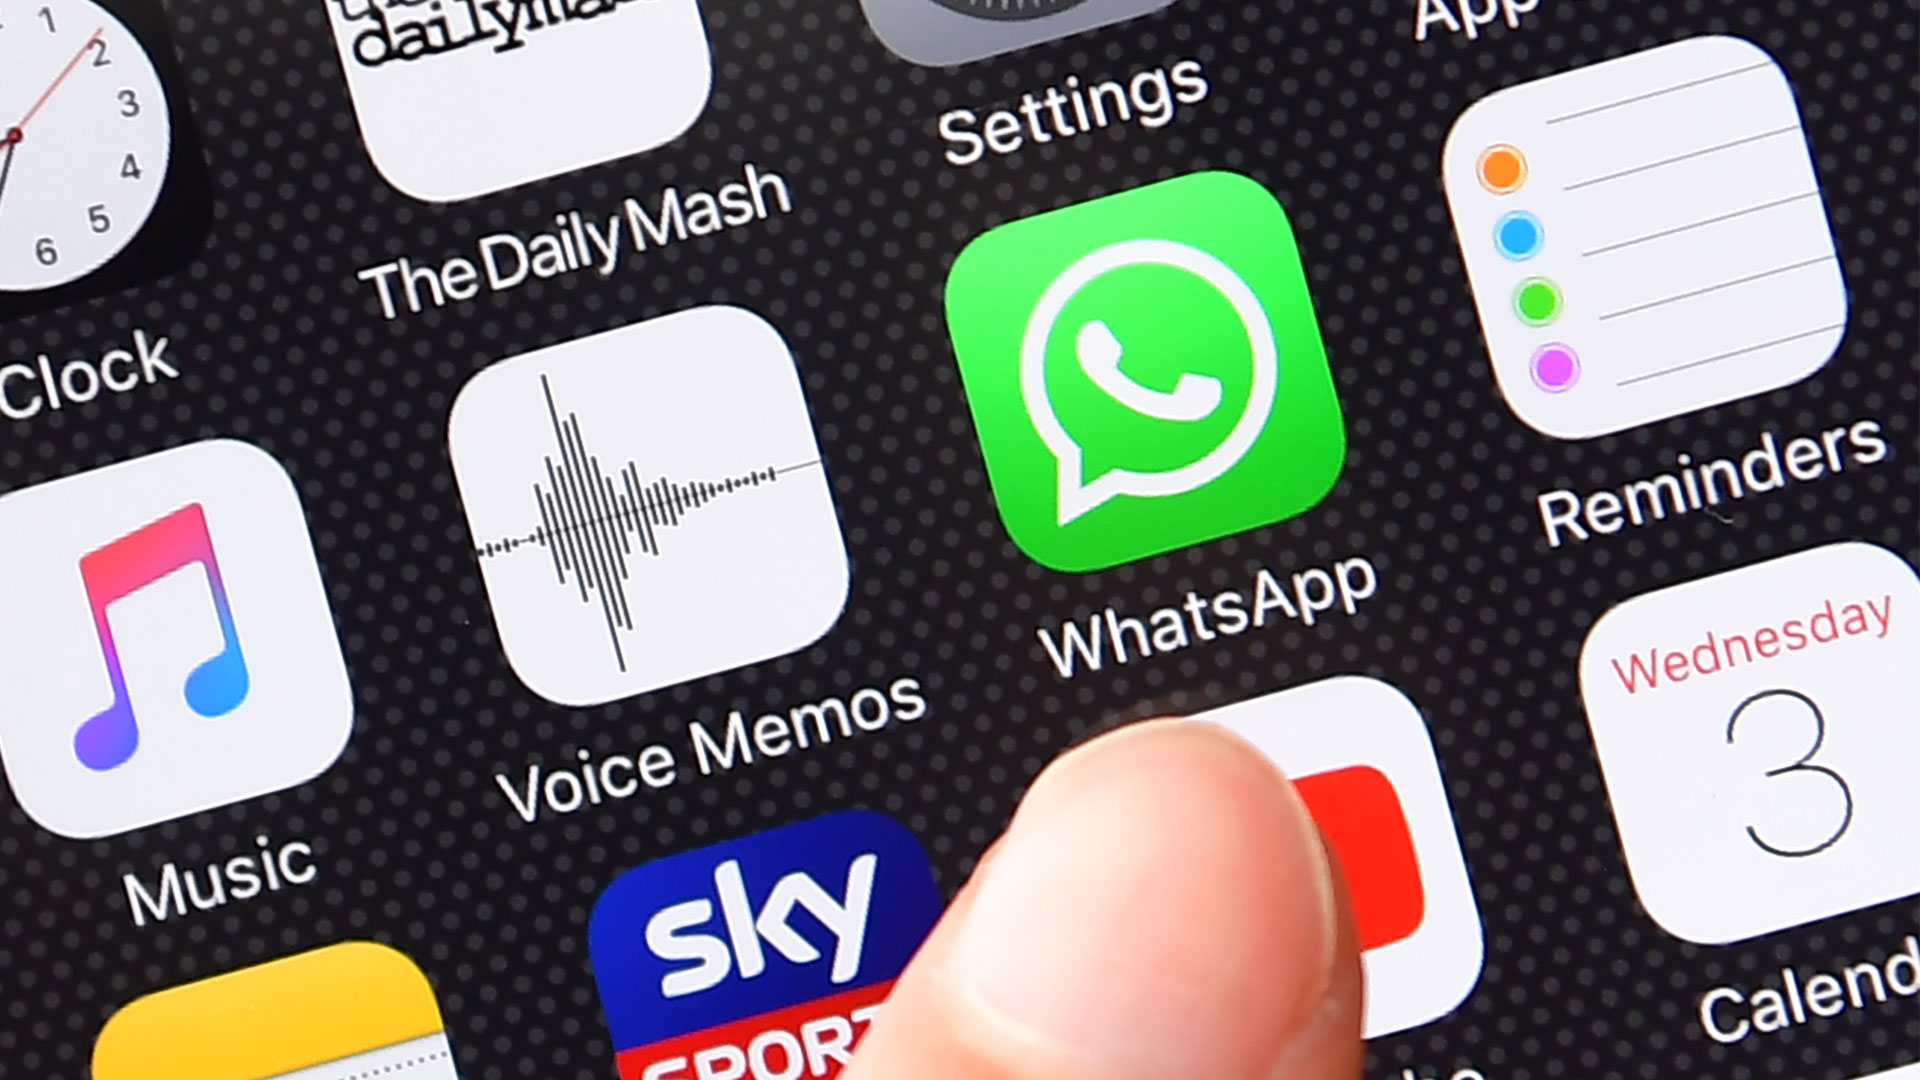 WhatsApp is working on a new feature that could change how you use it